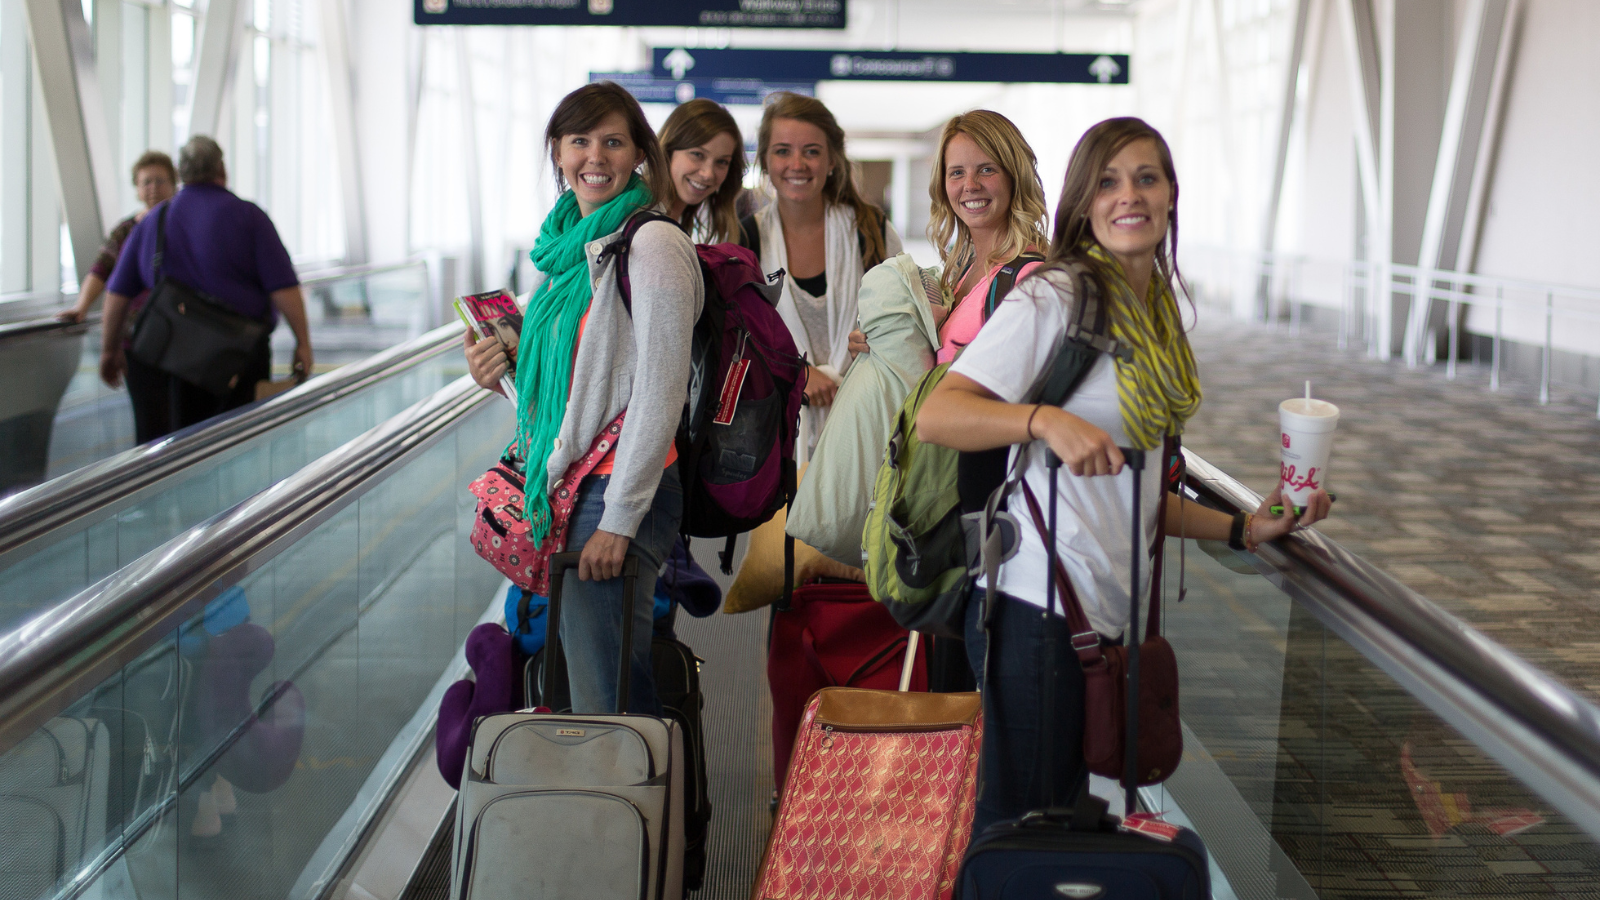 women traveling in airport